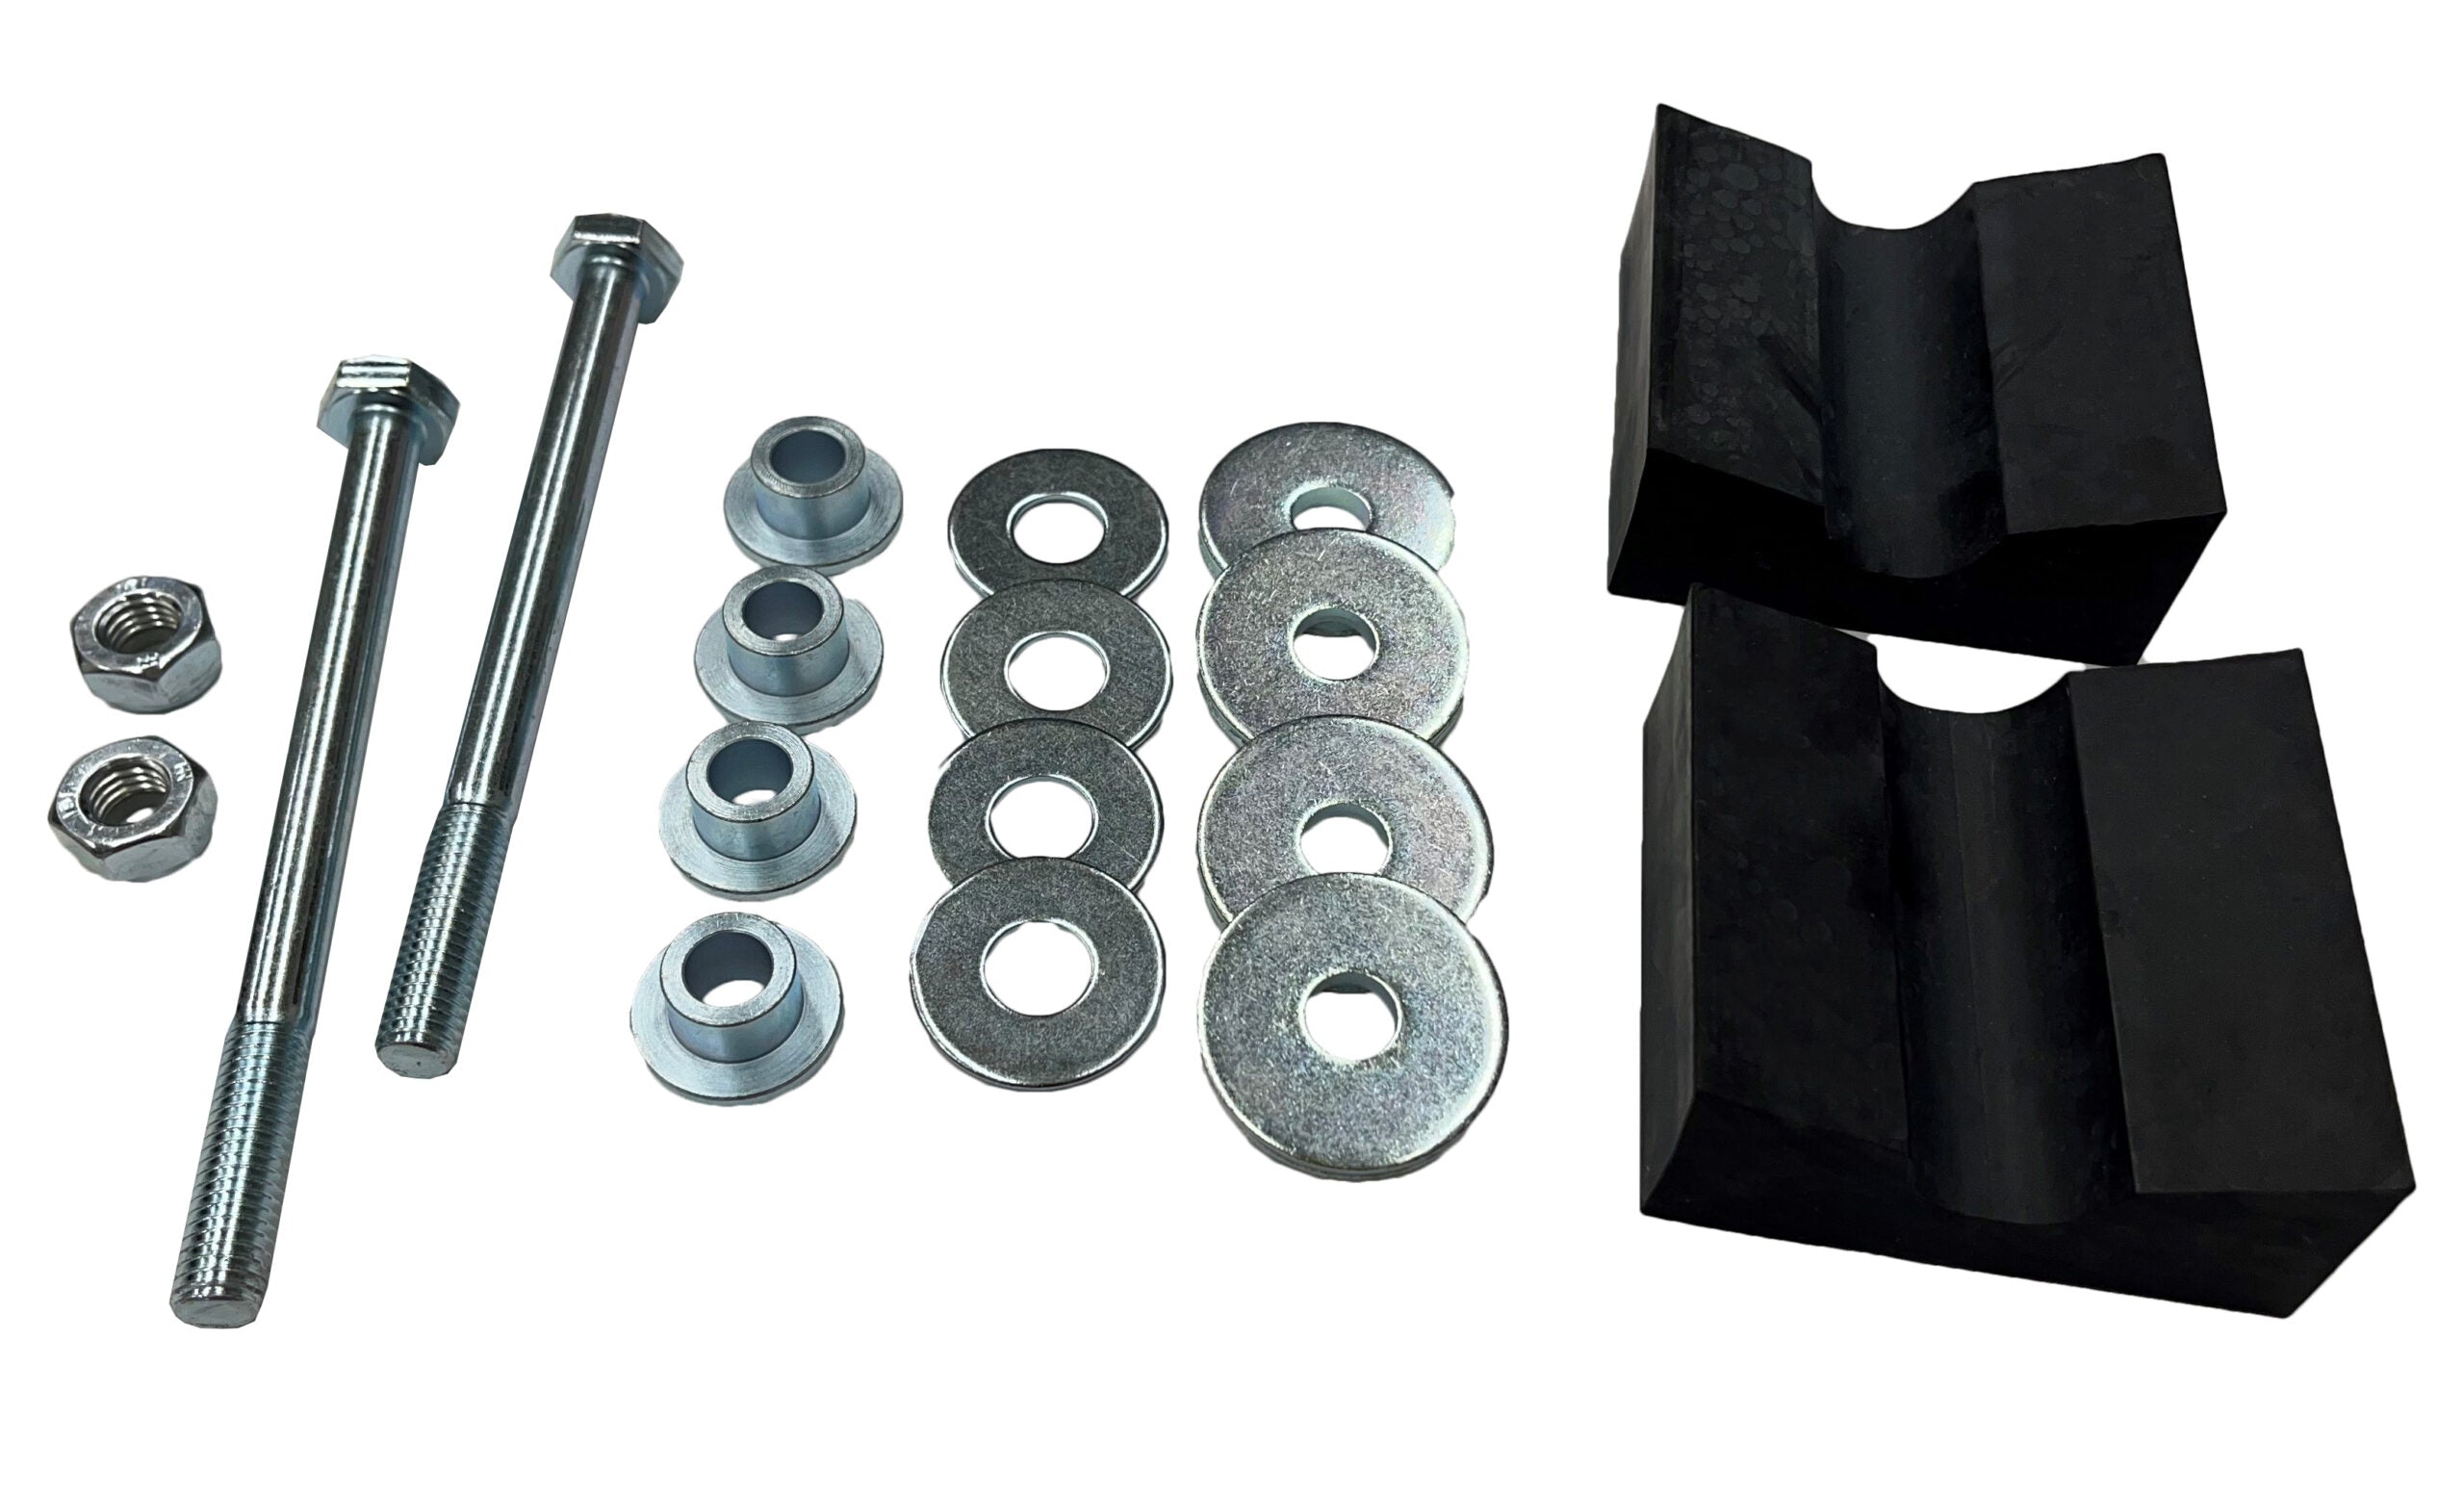 Mounting kit with dampeners and hardware for 2023 and Newer Ski-Doo 120cc and 200cc sleds